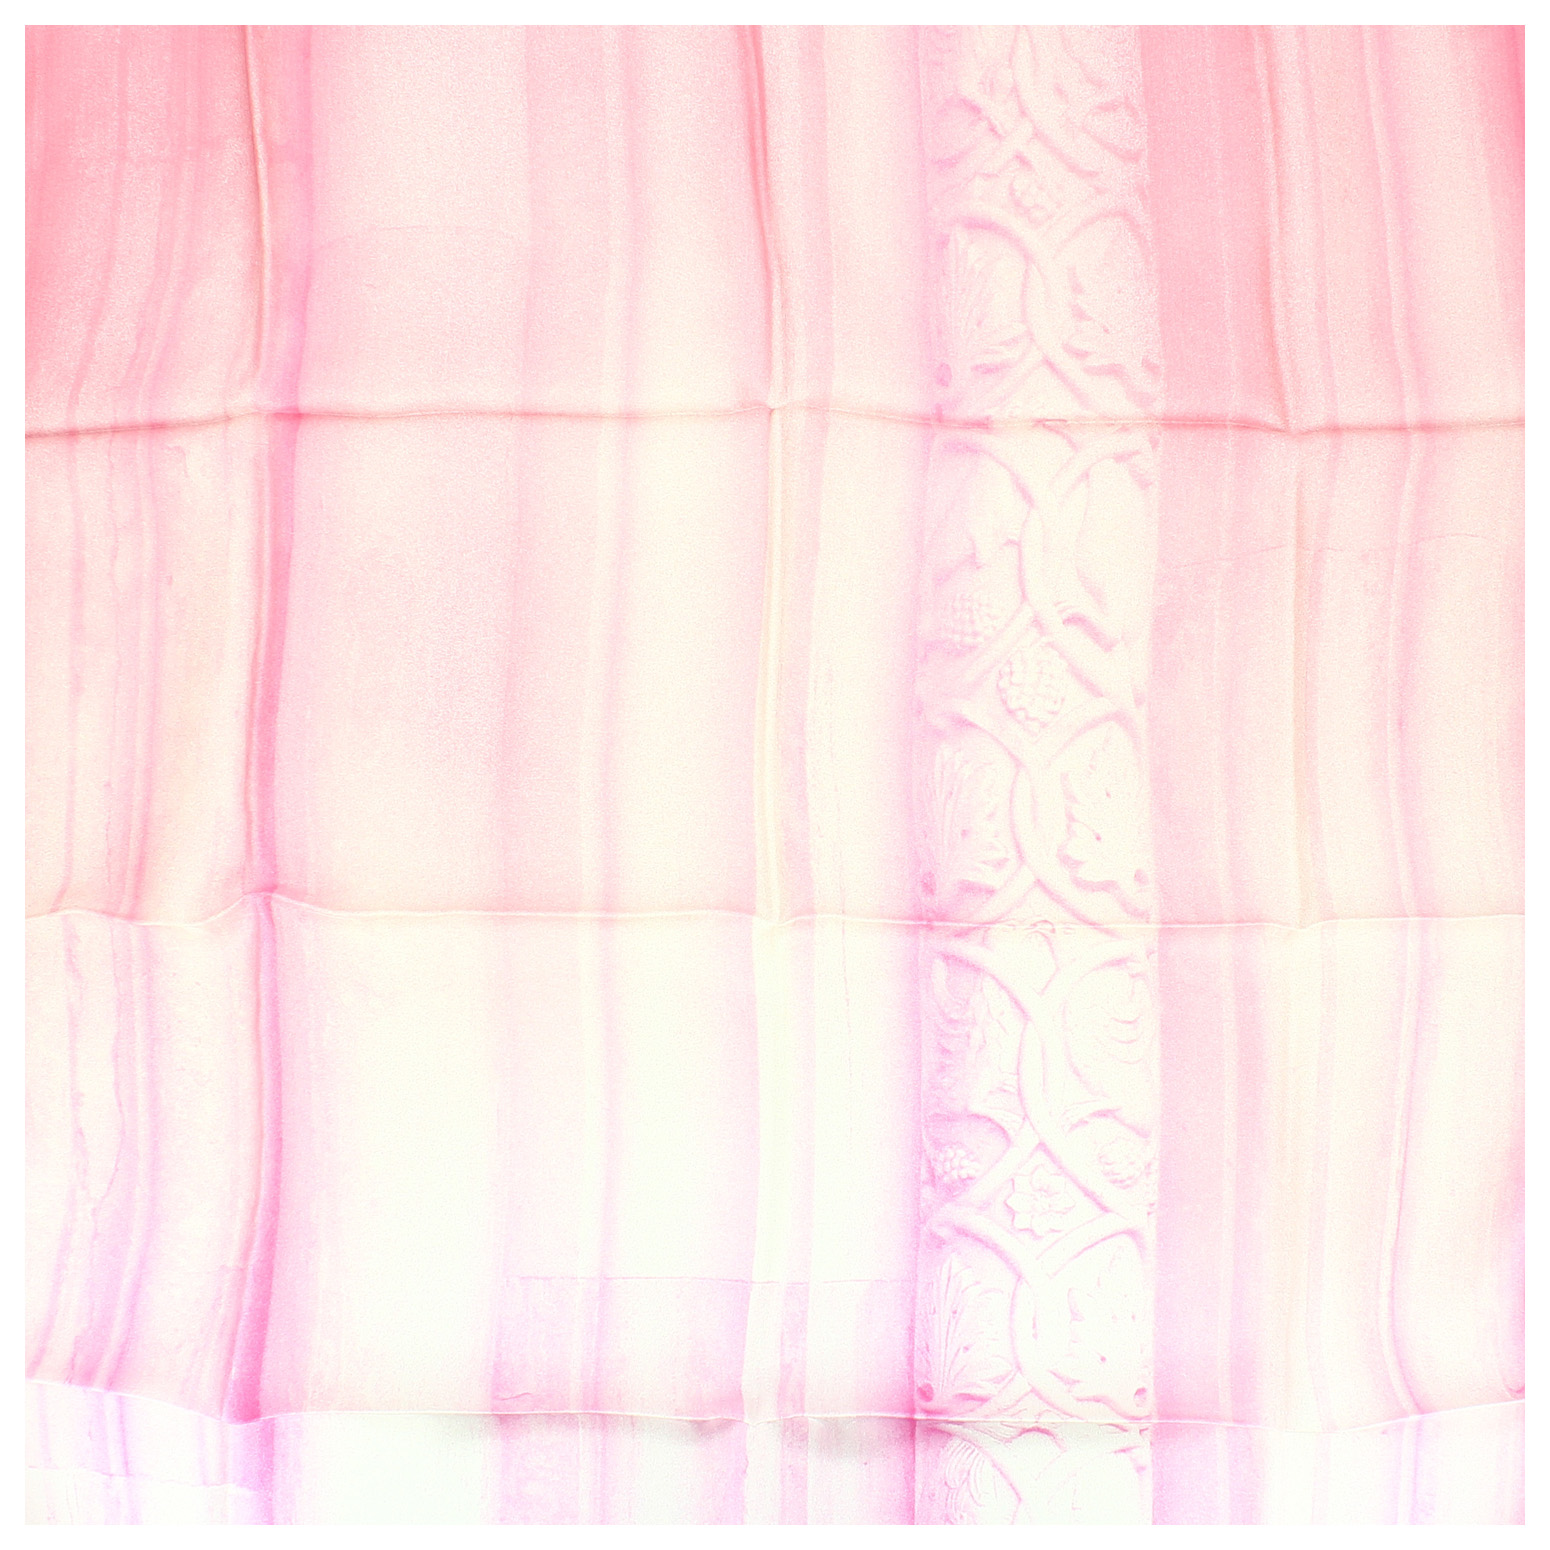 Carré 90 Brochier Petite Friture Abstraction n°1 Acireale Rose Soie